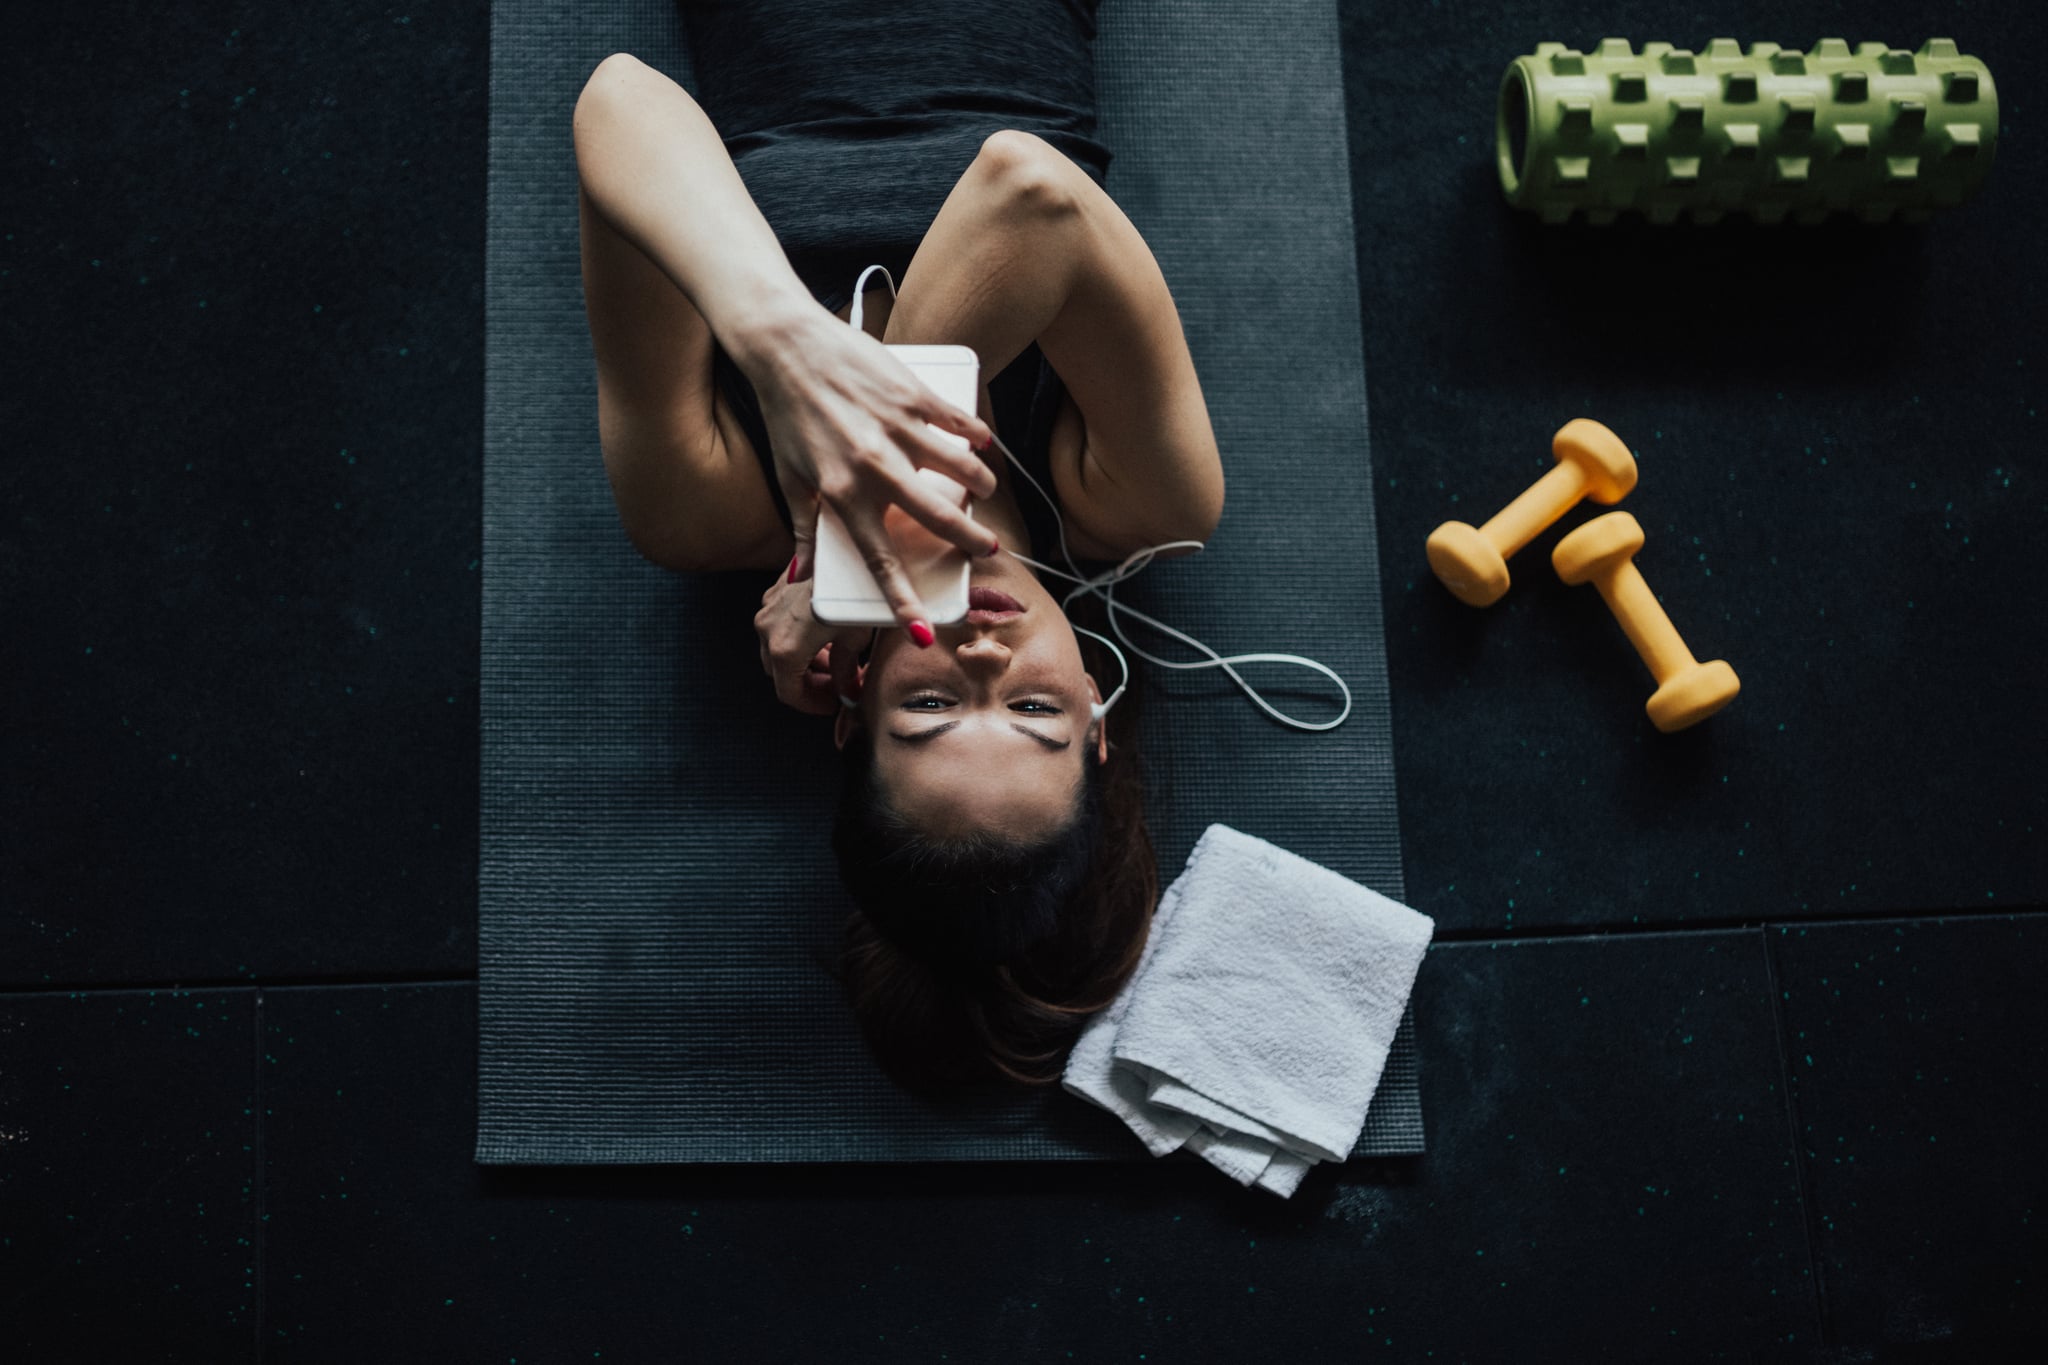 Woman listening to music and relaxing on the gym floor